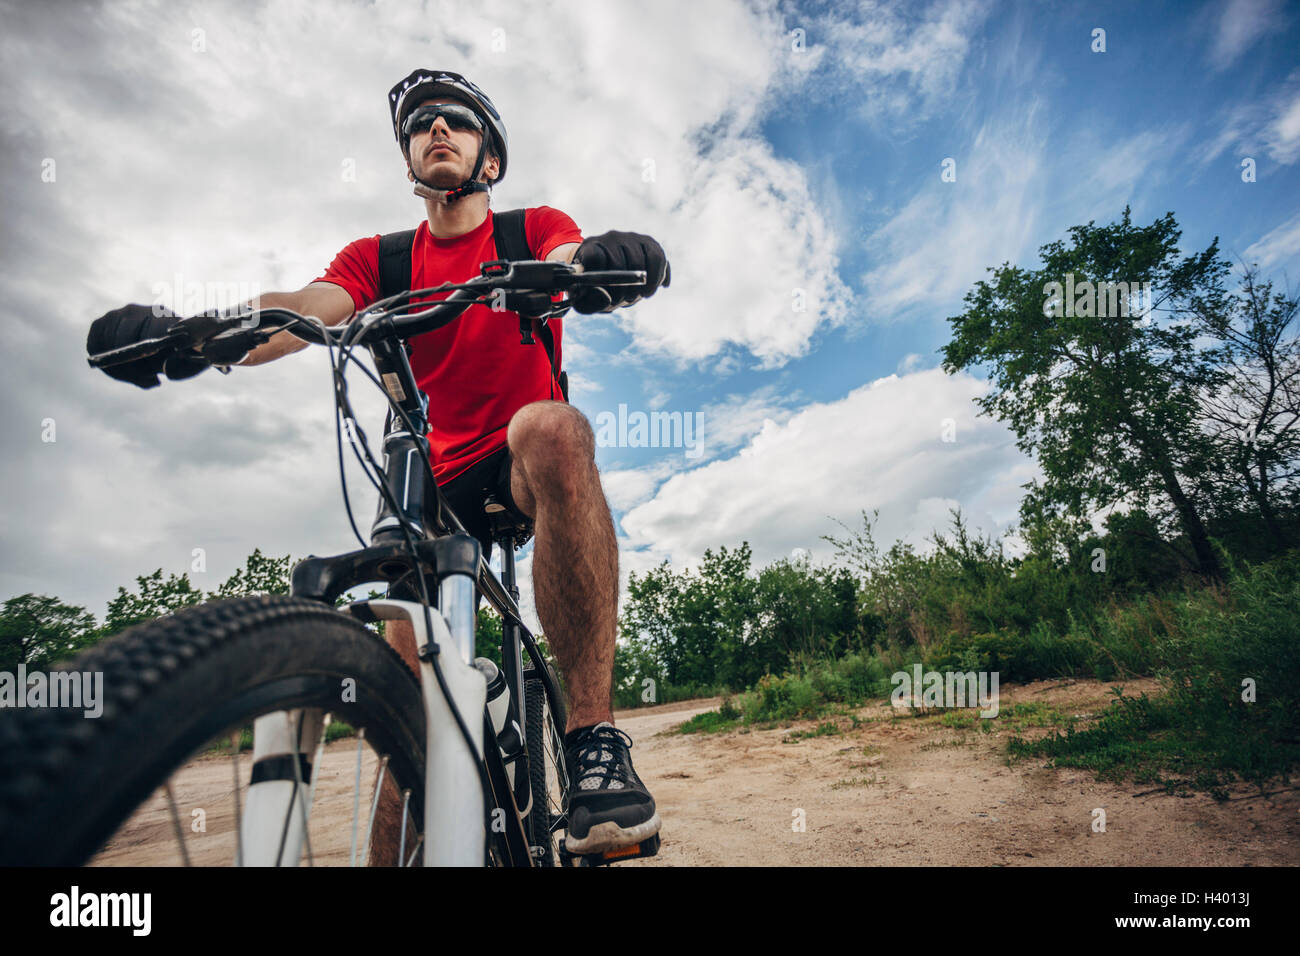 Low angle view of mountain biker riding on dirt road against sky Banque D'Images